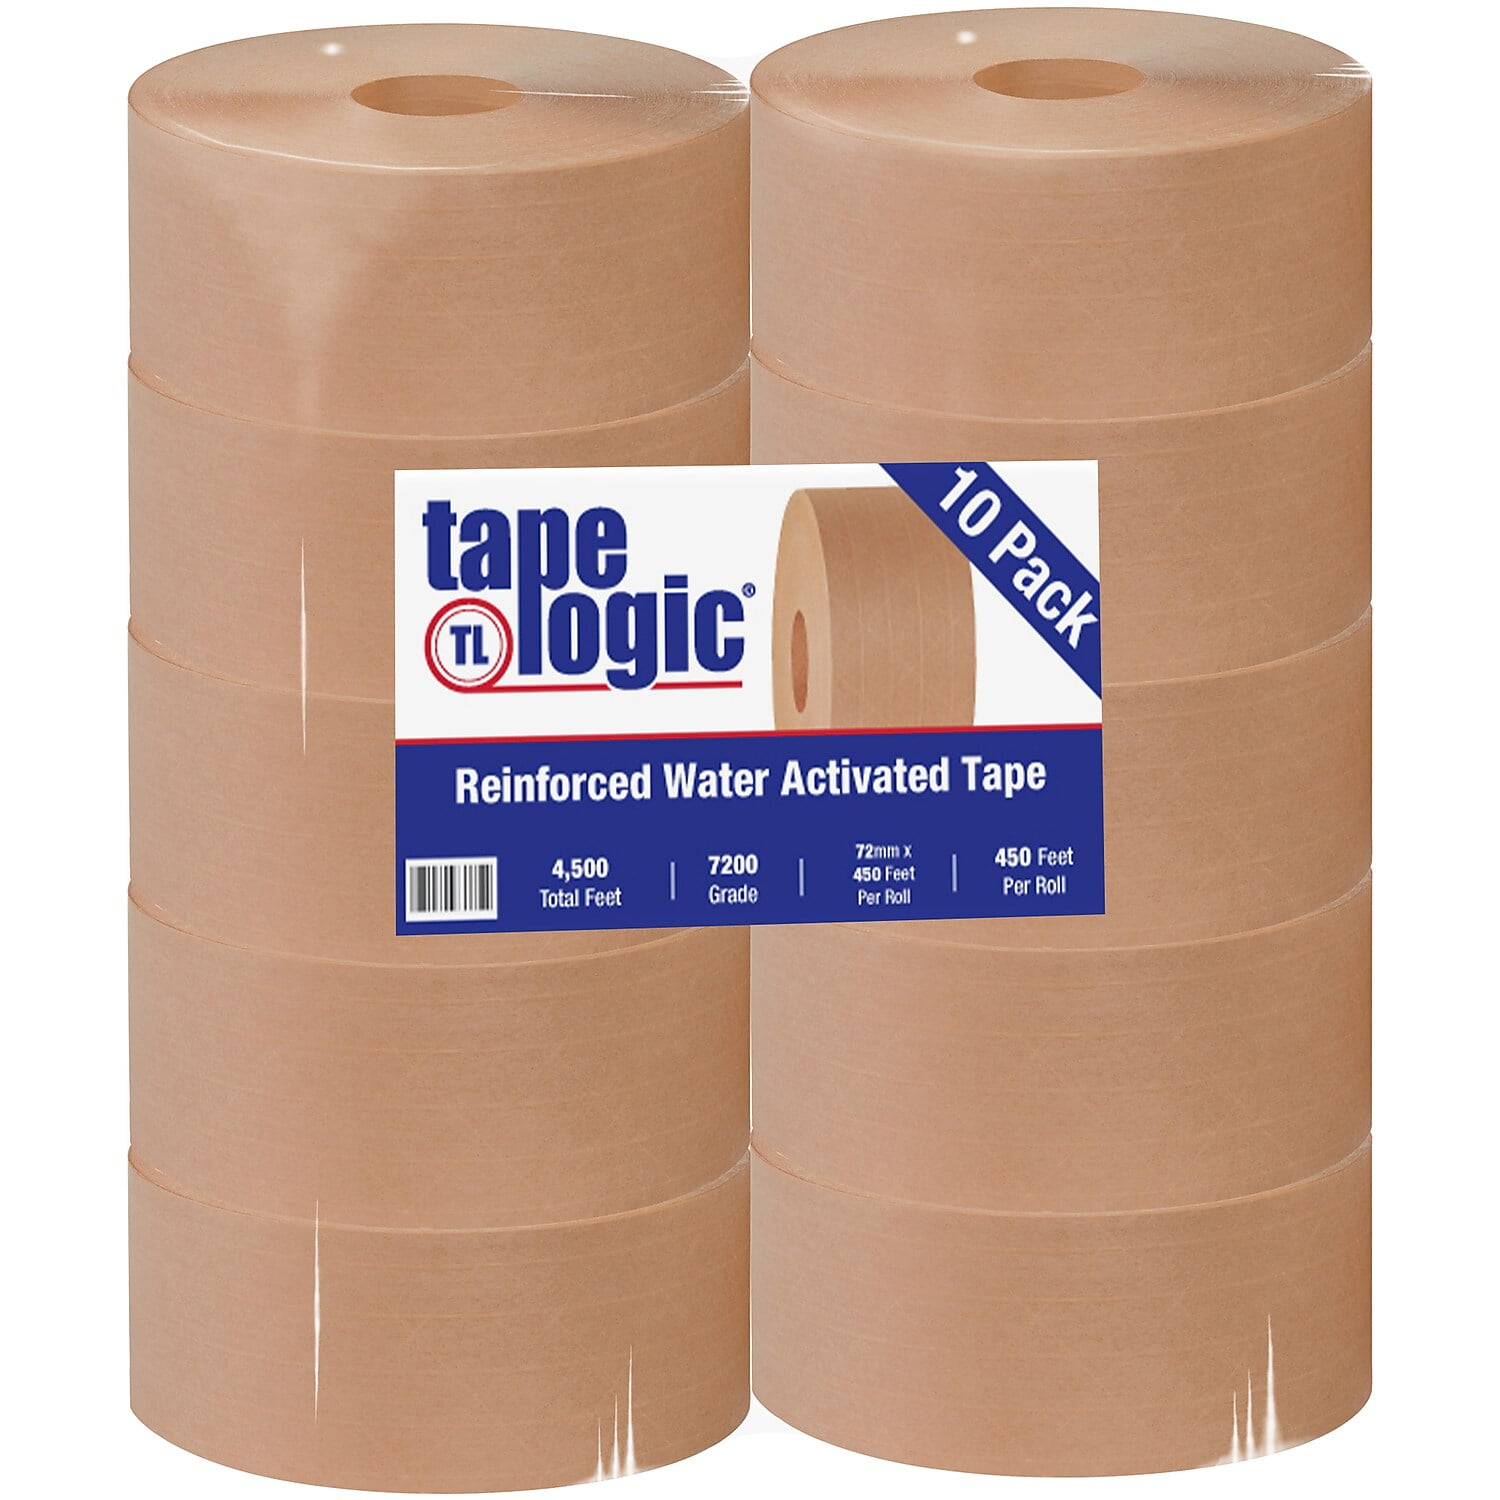 Tape Logic T9077200 72 Mm X 450 Ft. Kraft No.7200 Reinforced Water Activated Tape, Kraft - Case Of 10